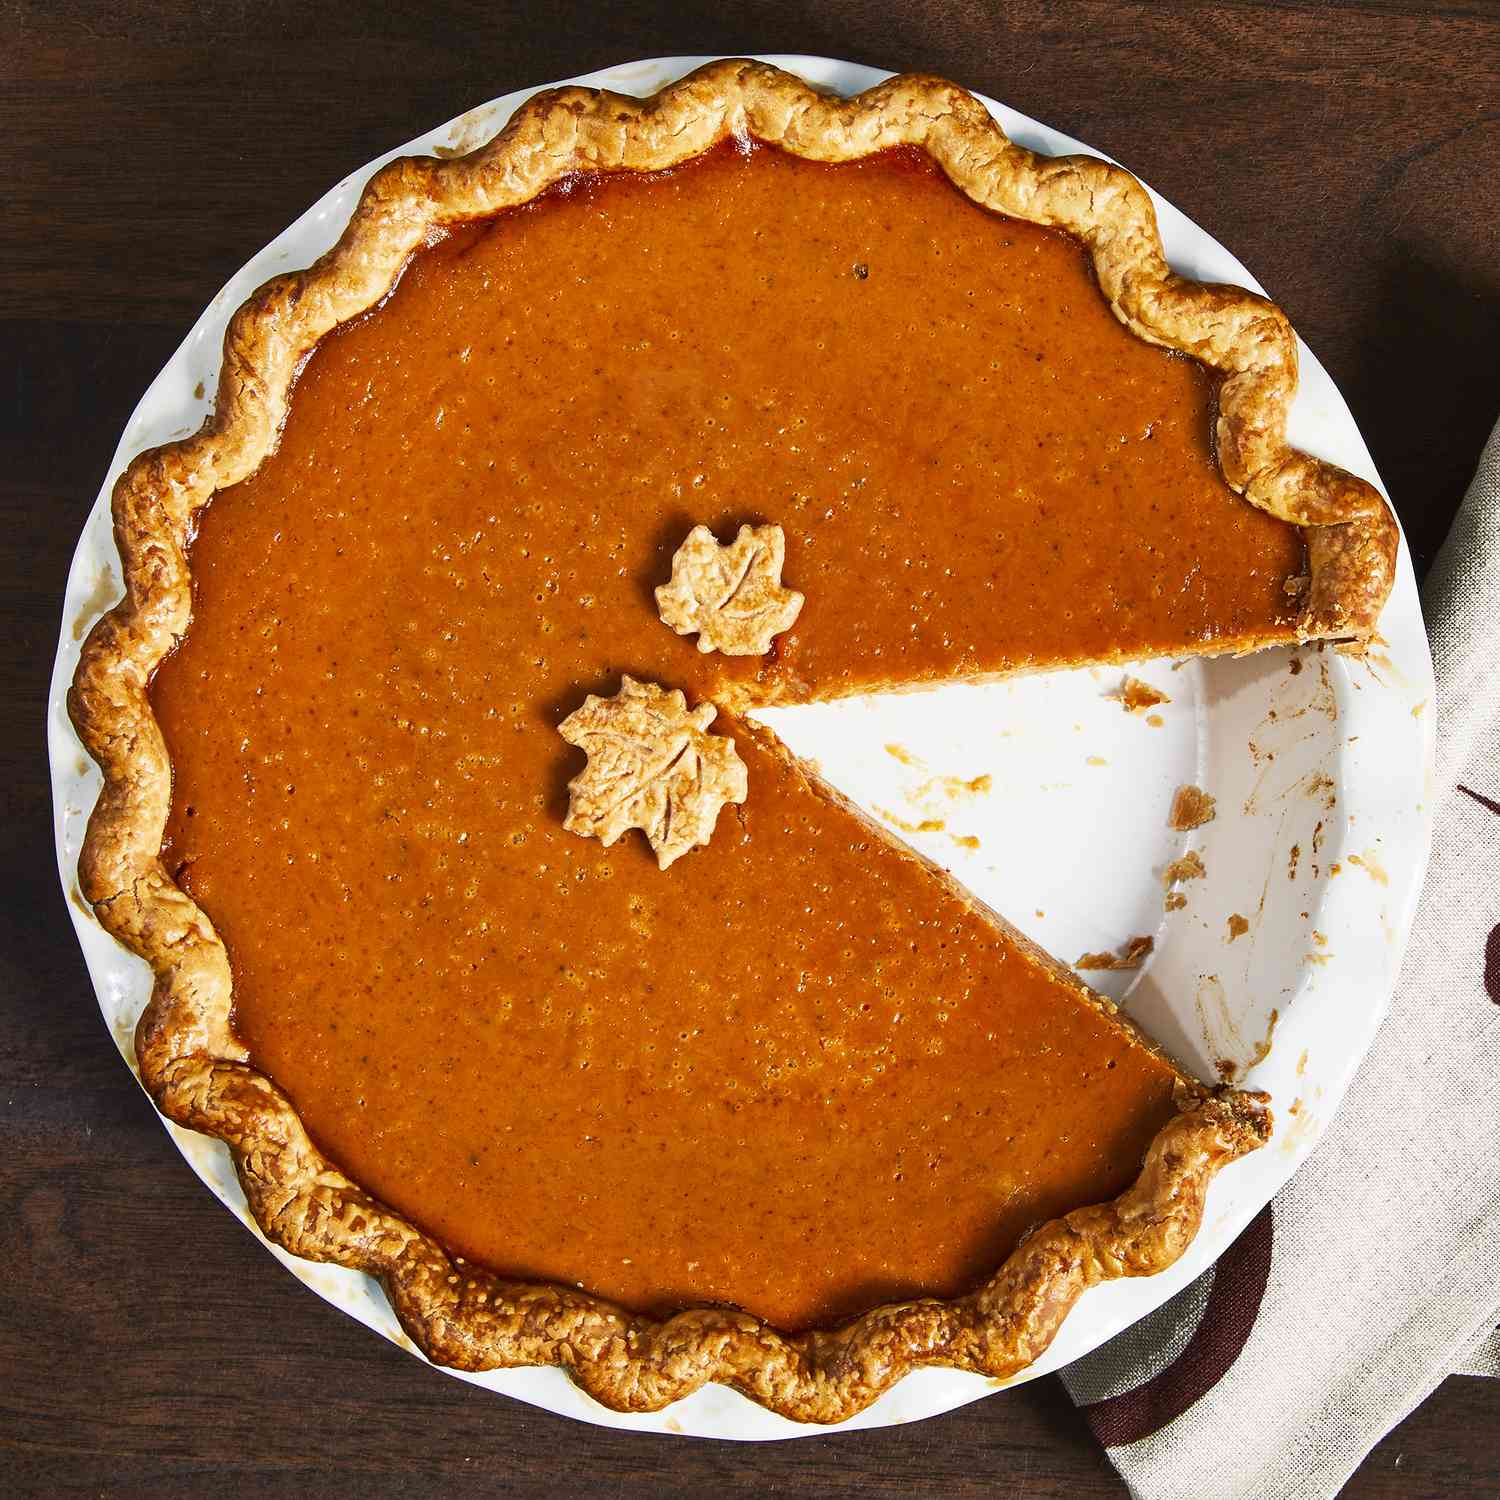 ### Elevate Your Autumn Desserts with This Irresistibly Creamy Homemade Pumpkin Pie Fusion